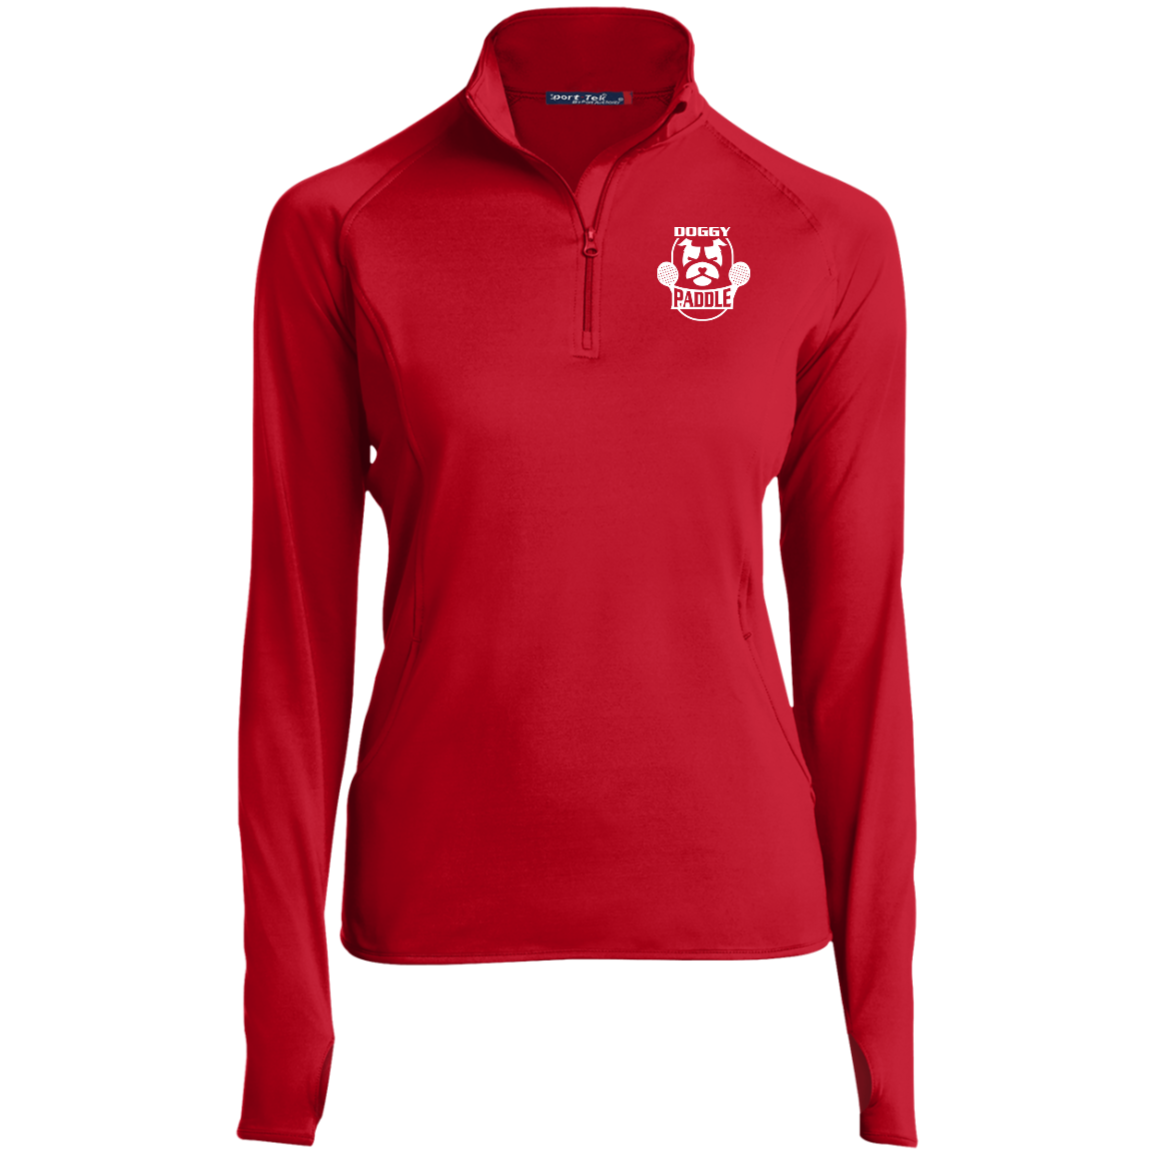 Doggy Paddle Women's  1/2 Zip Performance Pullover